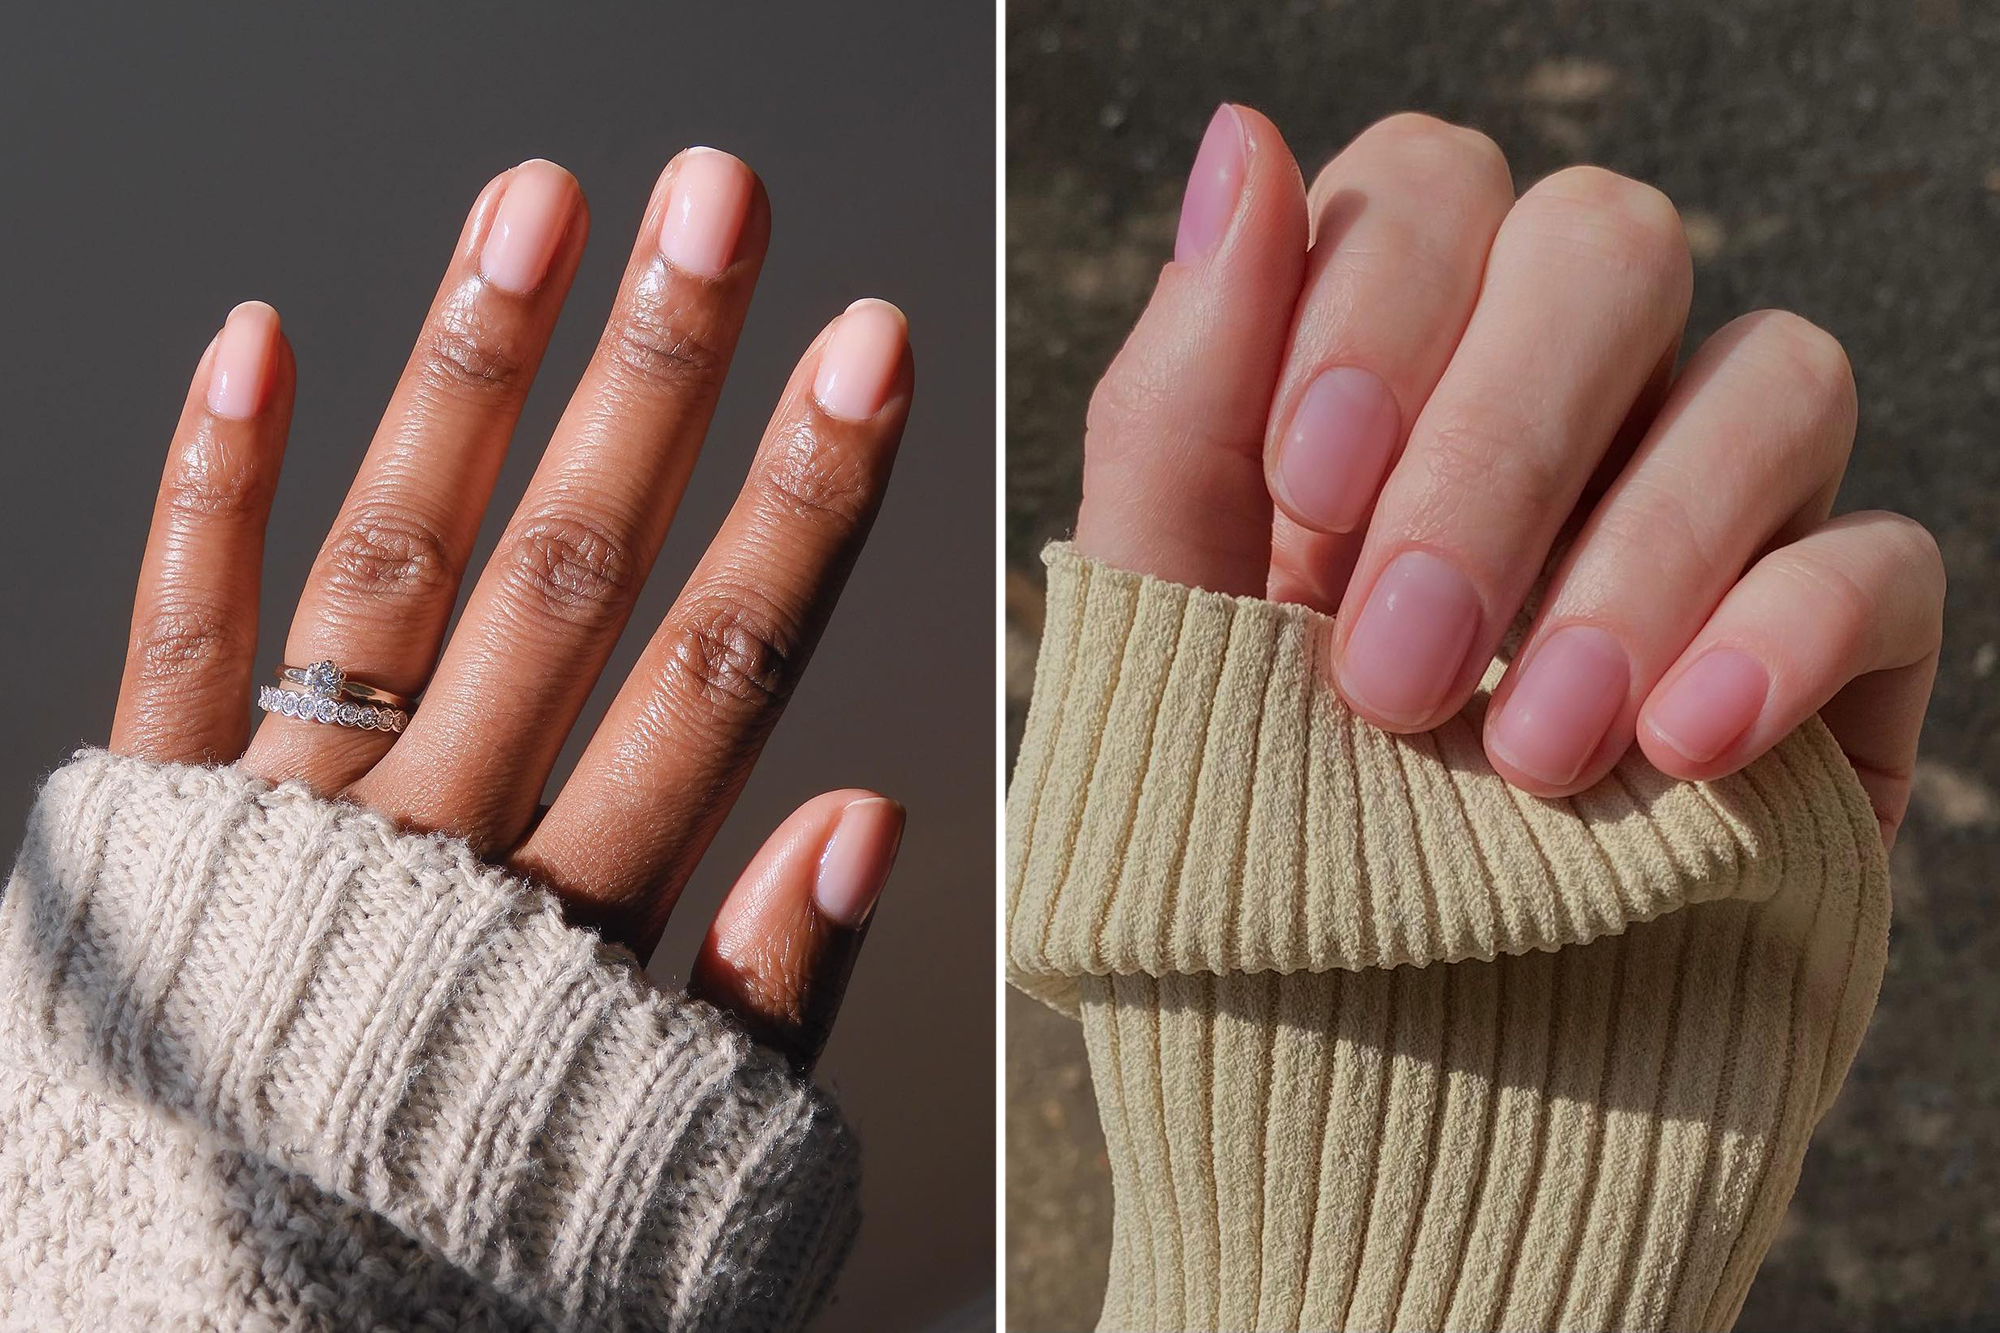 Nail tints are the hot trend of the summer — and much healthier for your nails